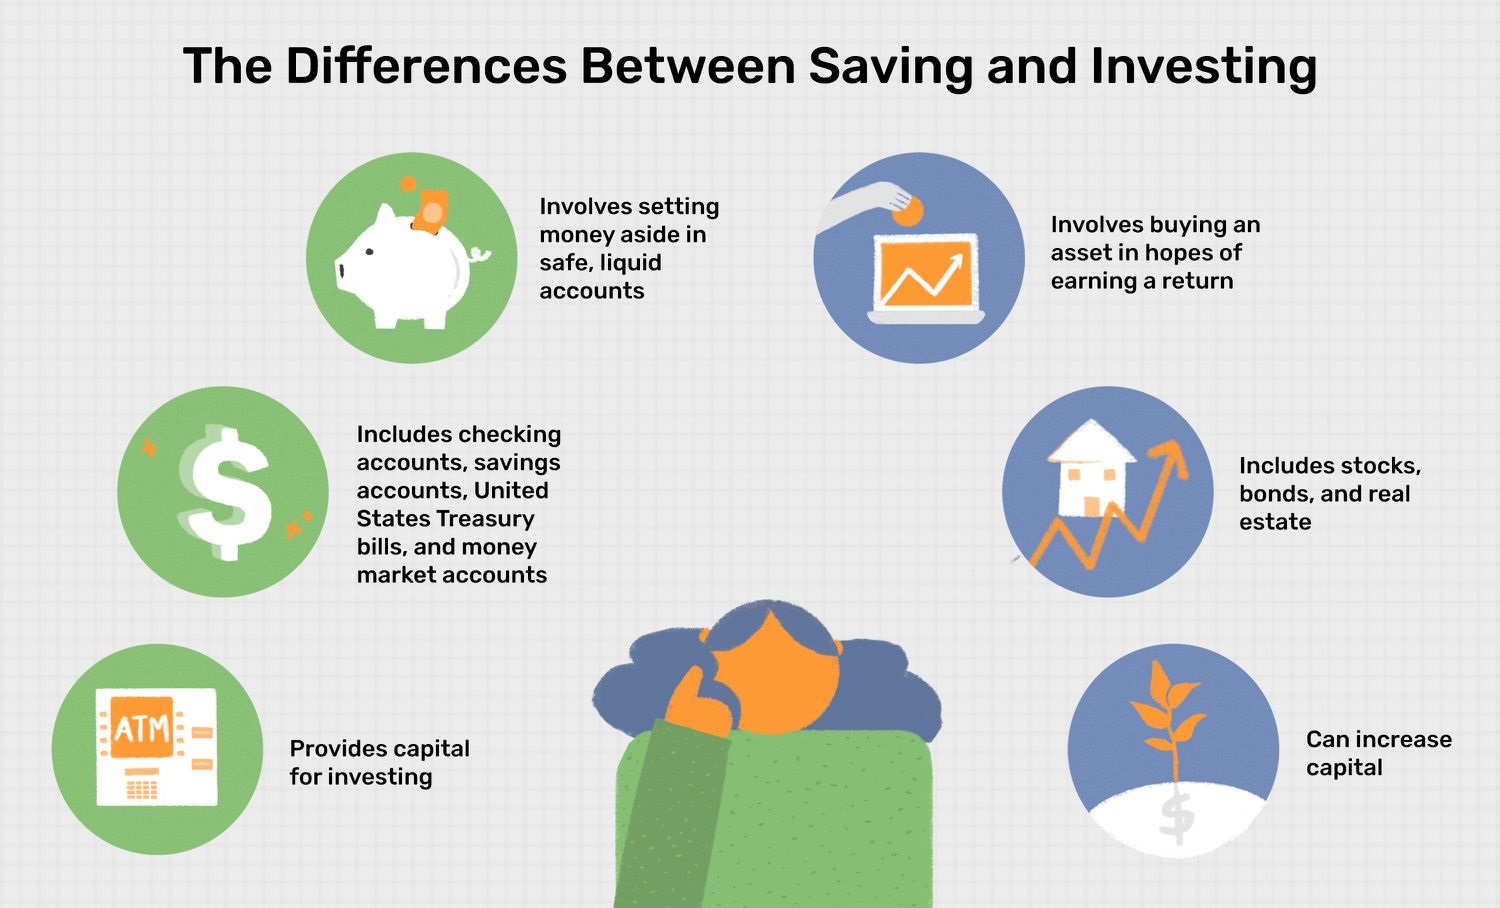 What Makes Investments Different From Savings?